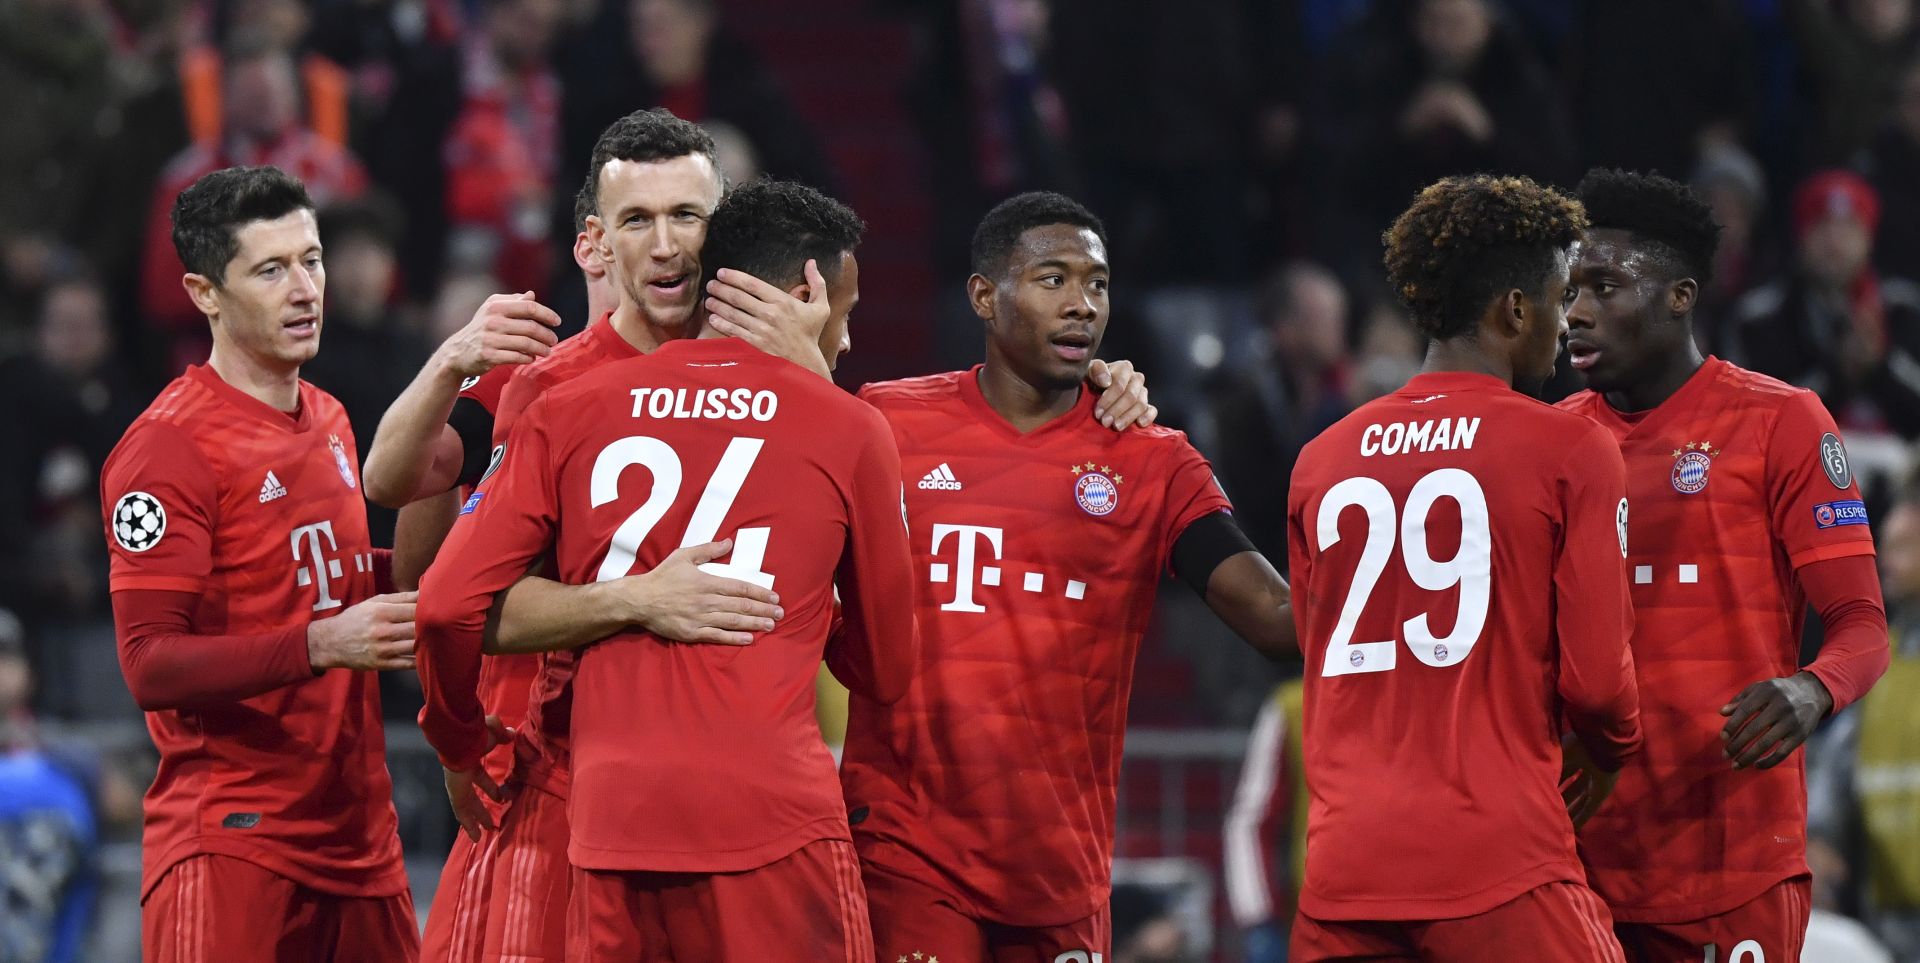 epa07977002 Bayern's Ivan Perisic (2-L) celebrates with team mates after scoring a goal during the UEFA Champions League group B soccer match between Bayern Munich? and Olympiacos Piraeus at the Allianz Arena in Munich, Germany, 06 November 2019.  EPA/PHILIPP GUELLAND